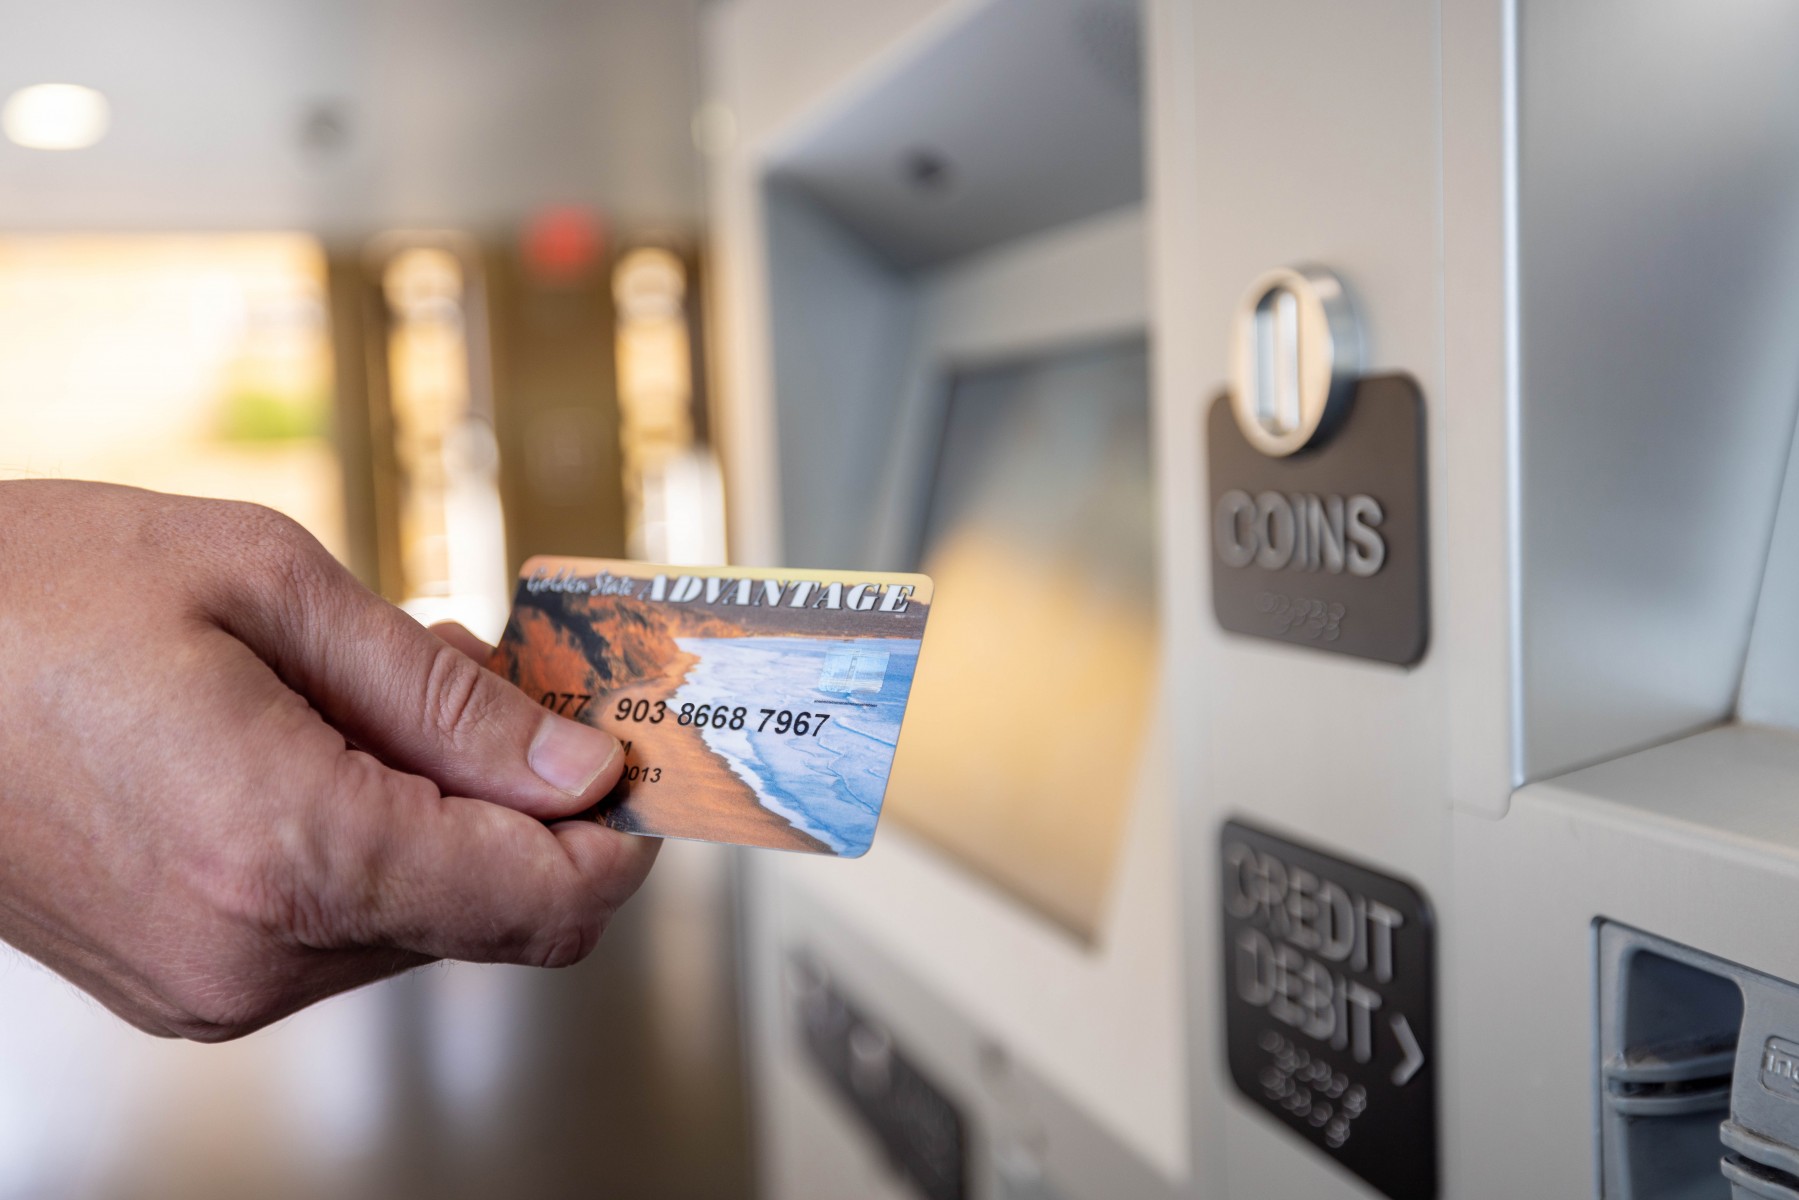 ebtEDGE, California's new app could thwart skimmers, theft